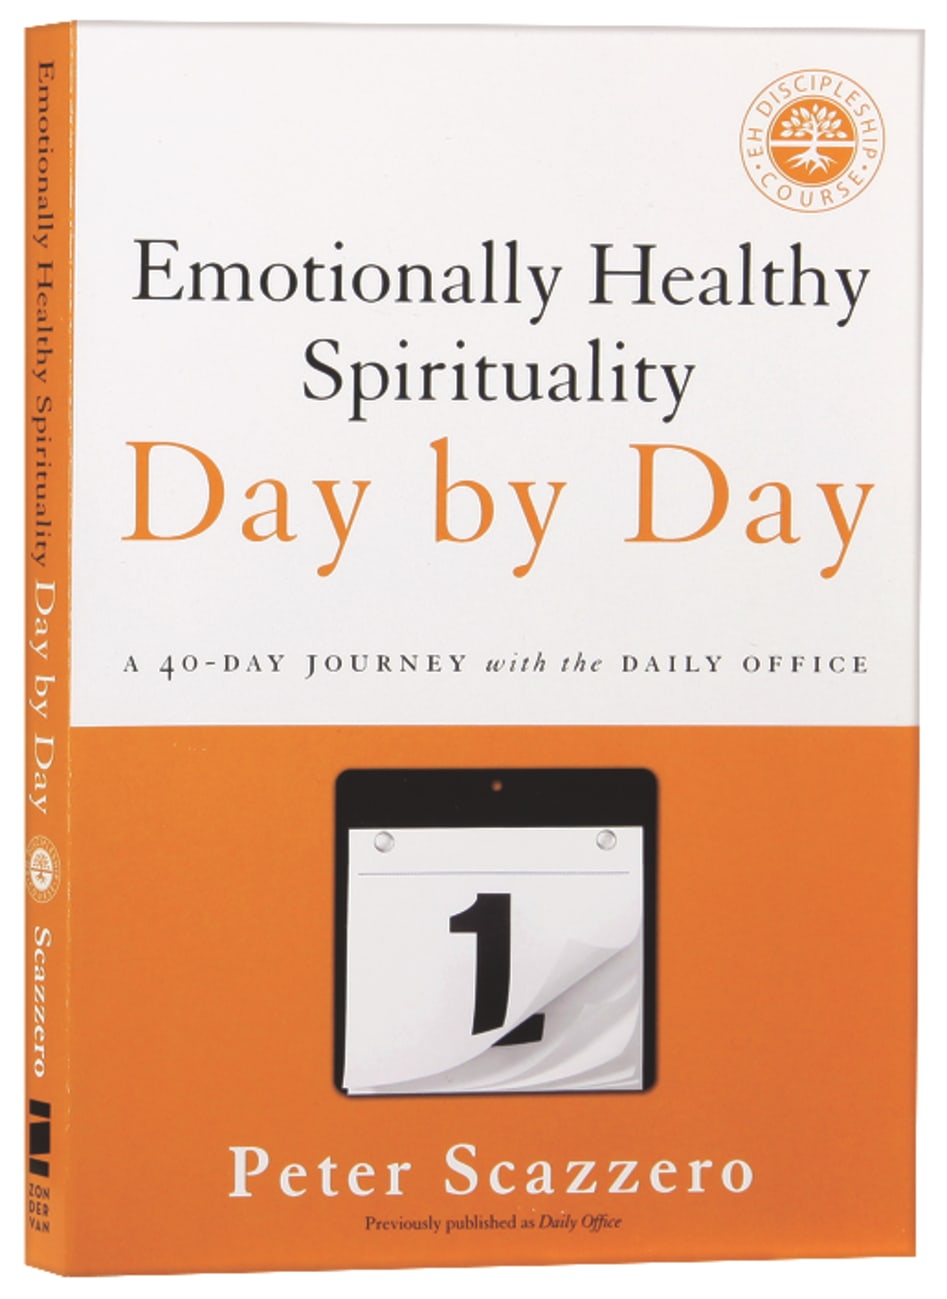 Emotionally Healthy Spirituality Day By Day: A 40-Day Journey With the Daily Office Paperback